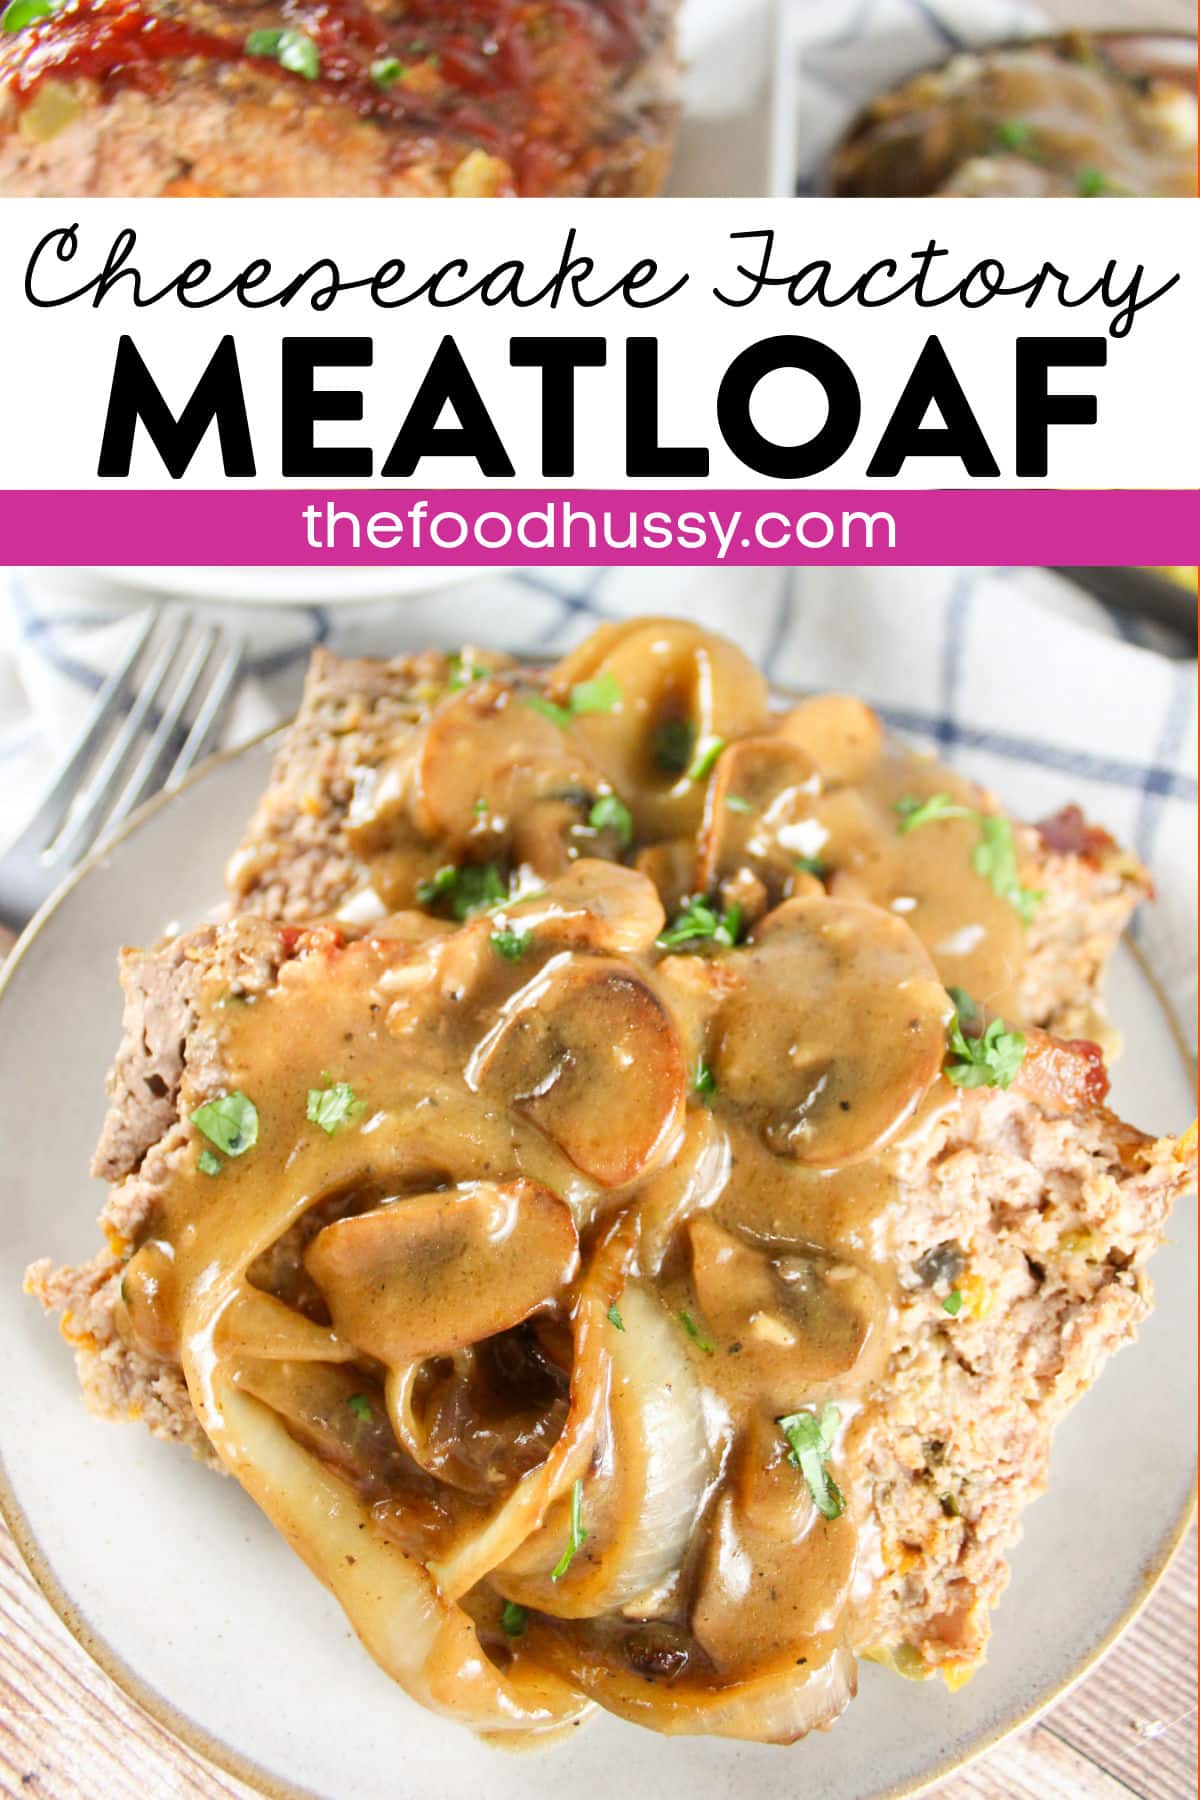 This Copycat Cheesecake Factory Meatloaf is spot on - loaded with ground beef & pork, veggies and the perfect blend of seasonings. And no worries - it's also smothered in a rich brown gravy filled with sauteed onions and mushrooms! Comfort food at its best! via @foodhussy